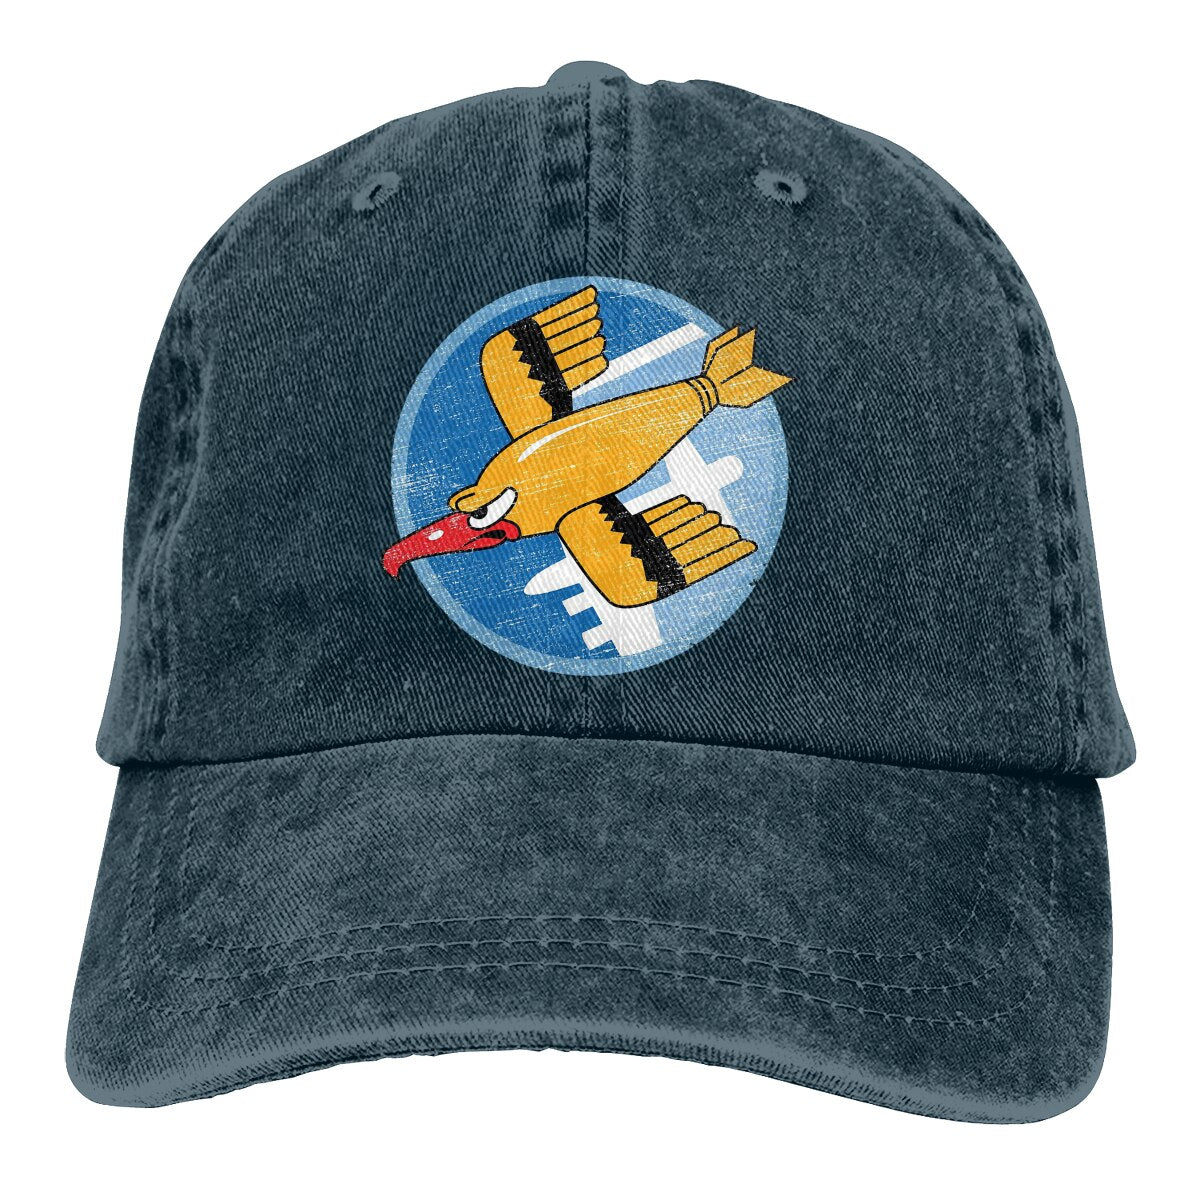 91st Bomb Squadron Flying Fortress Patch Gear The Baseball Cap Peaked capt Sport Unisex Outdoor Custom ww2 WWII World War 2 Hats